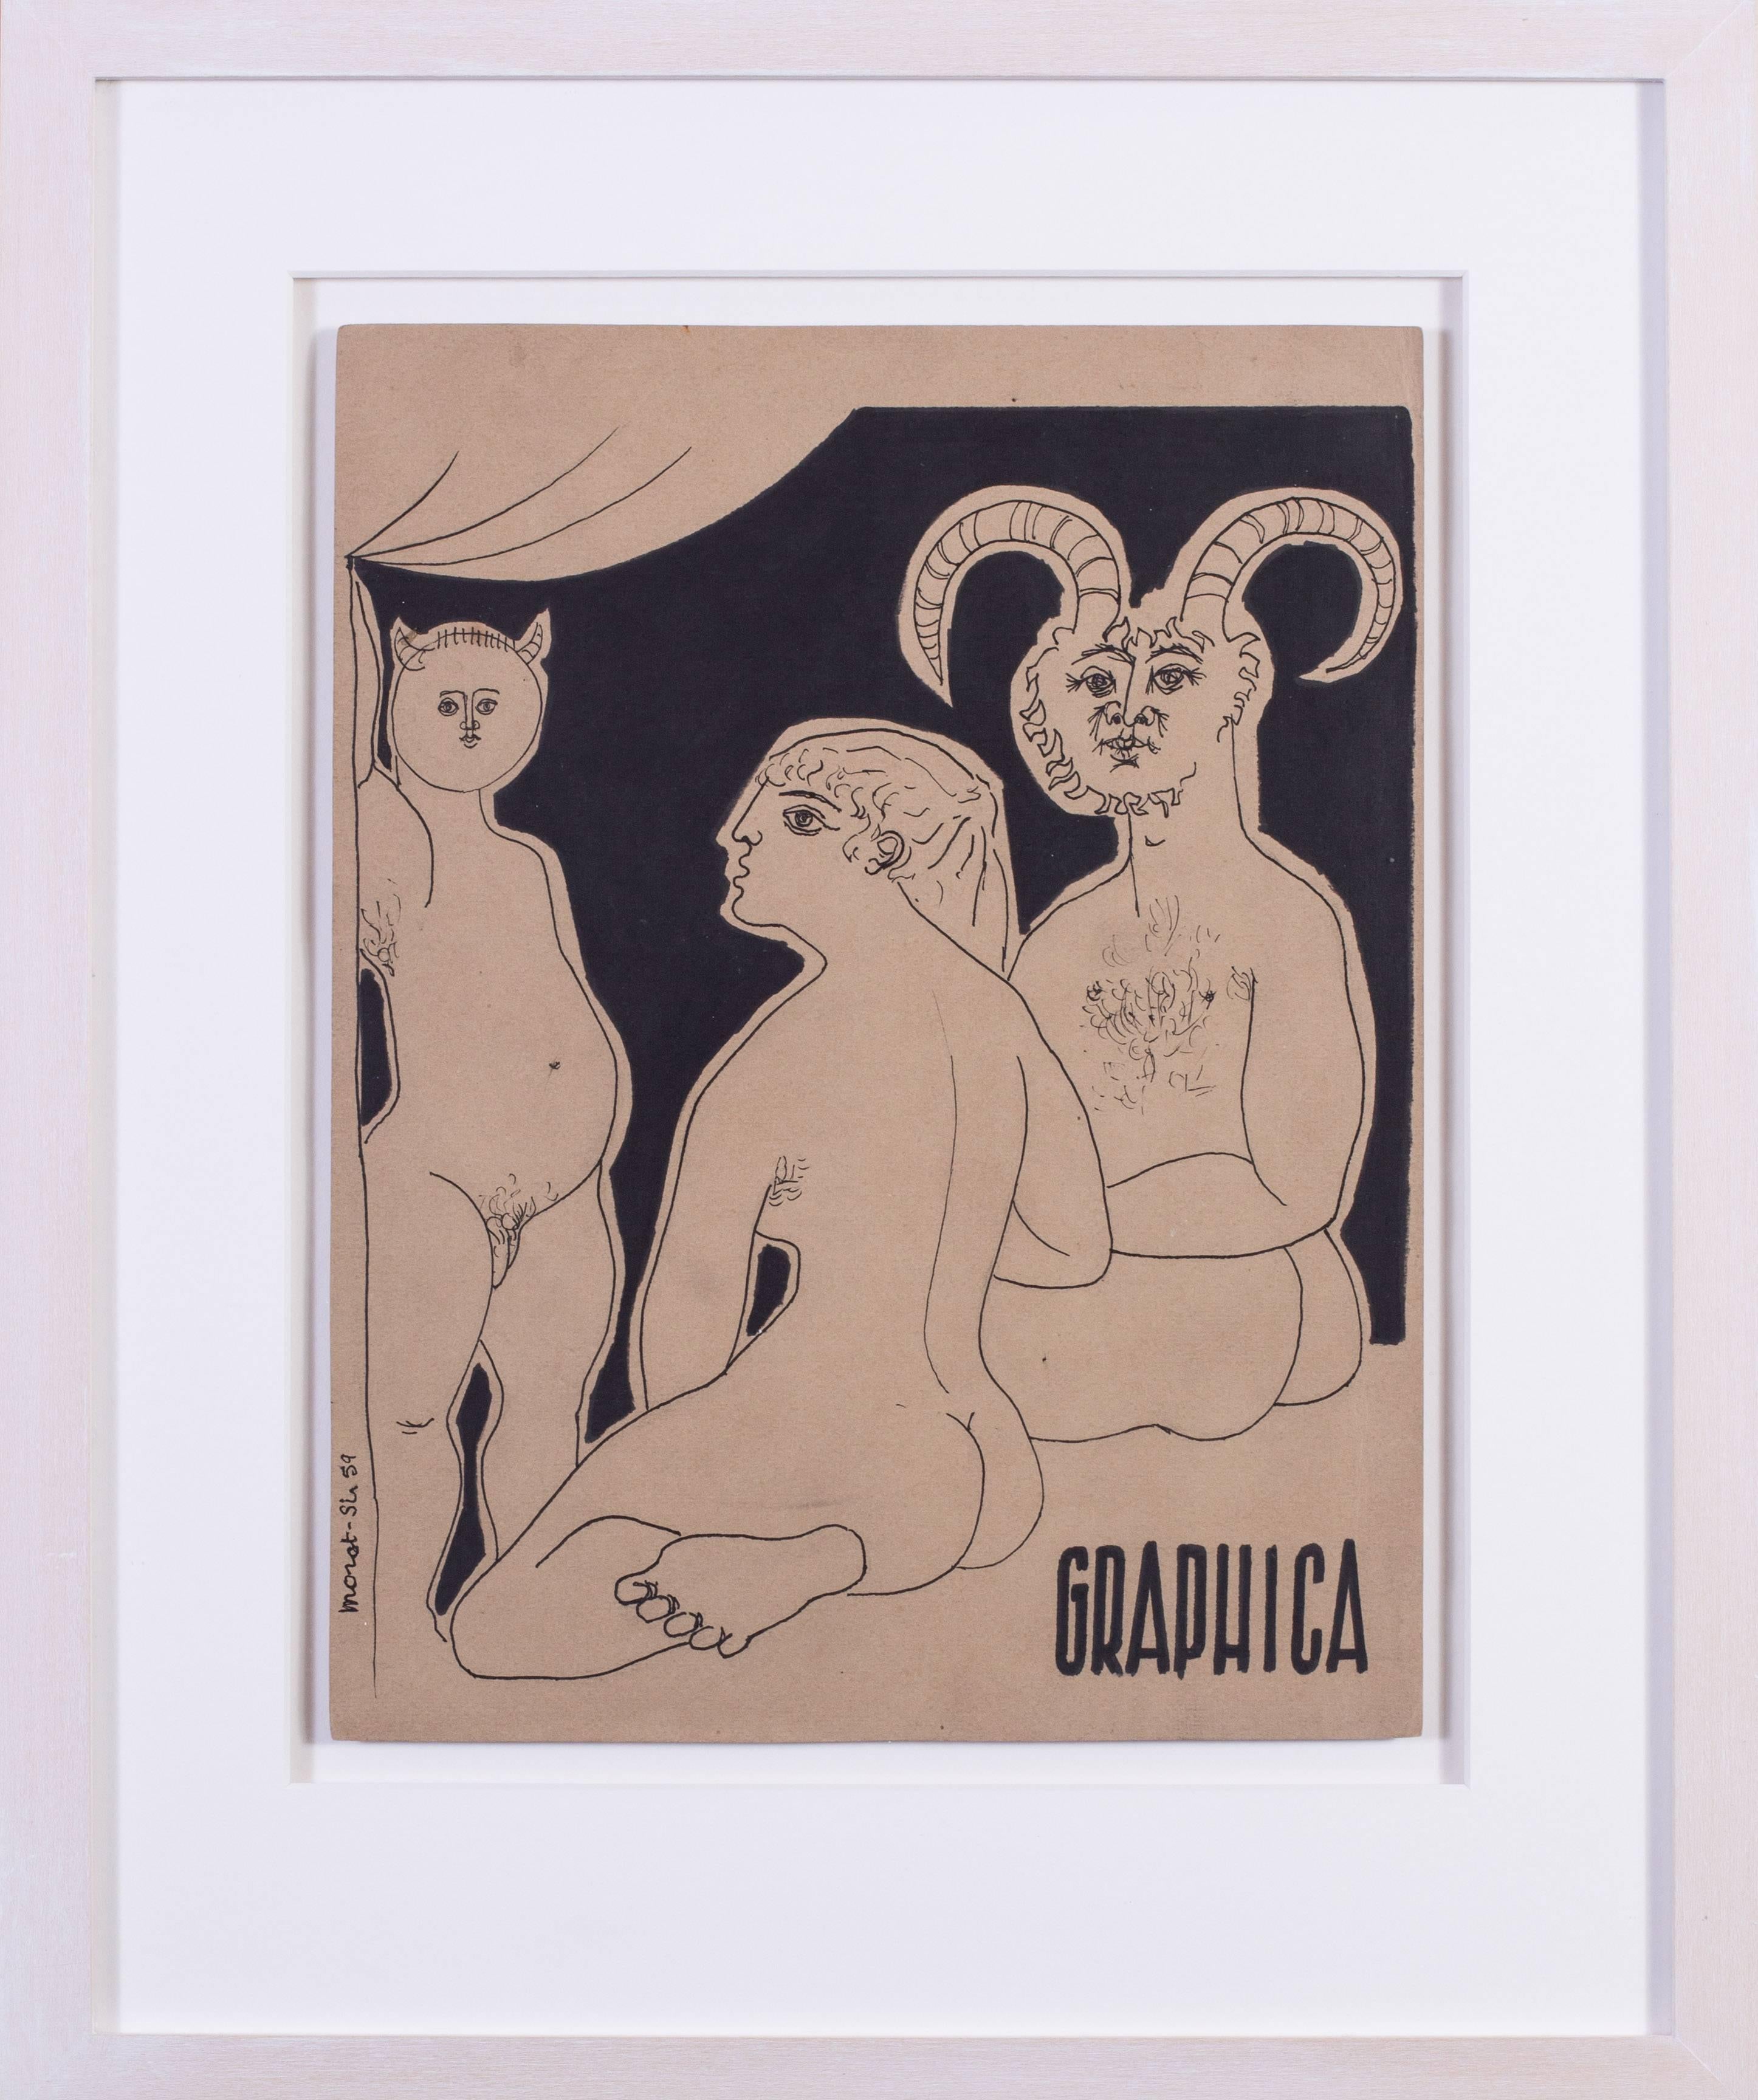 Gerard Morot-Sir Figurative Art – Mid 20th Century French Expressionist drawing by Morot-Sir 'Graphica'